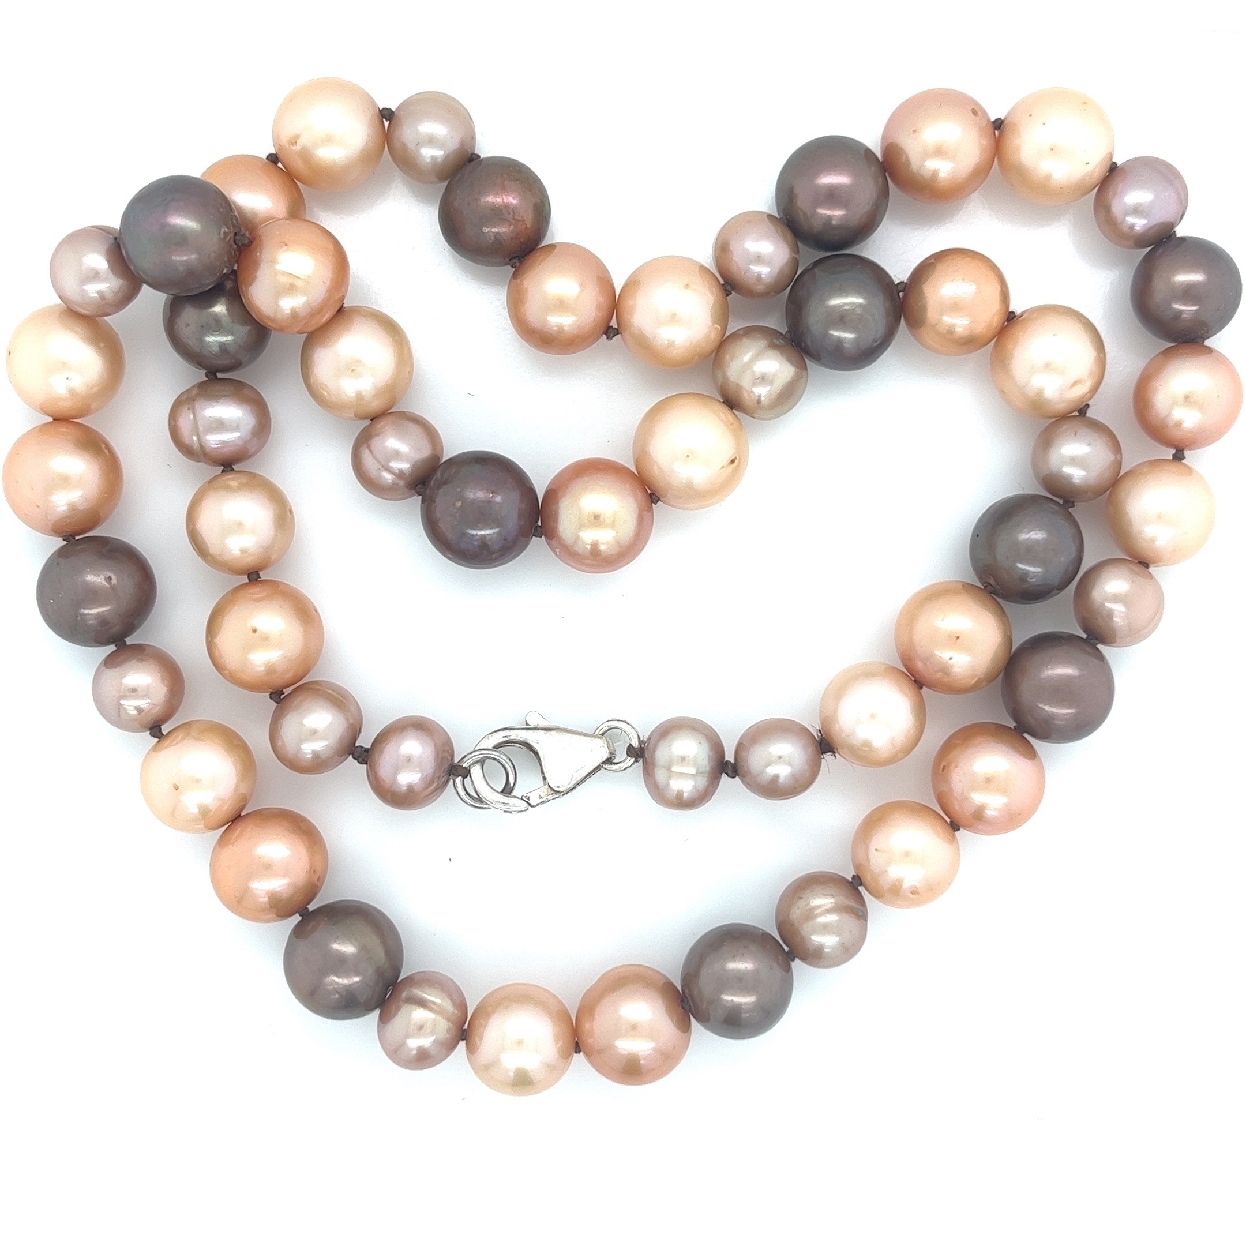 Variegated Brown/Taupe Pearl Strand with Sterling Silver Clasp

6-9mm Pearls Varying Size and Shape
19.5 Inches